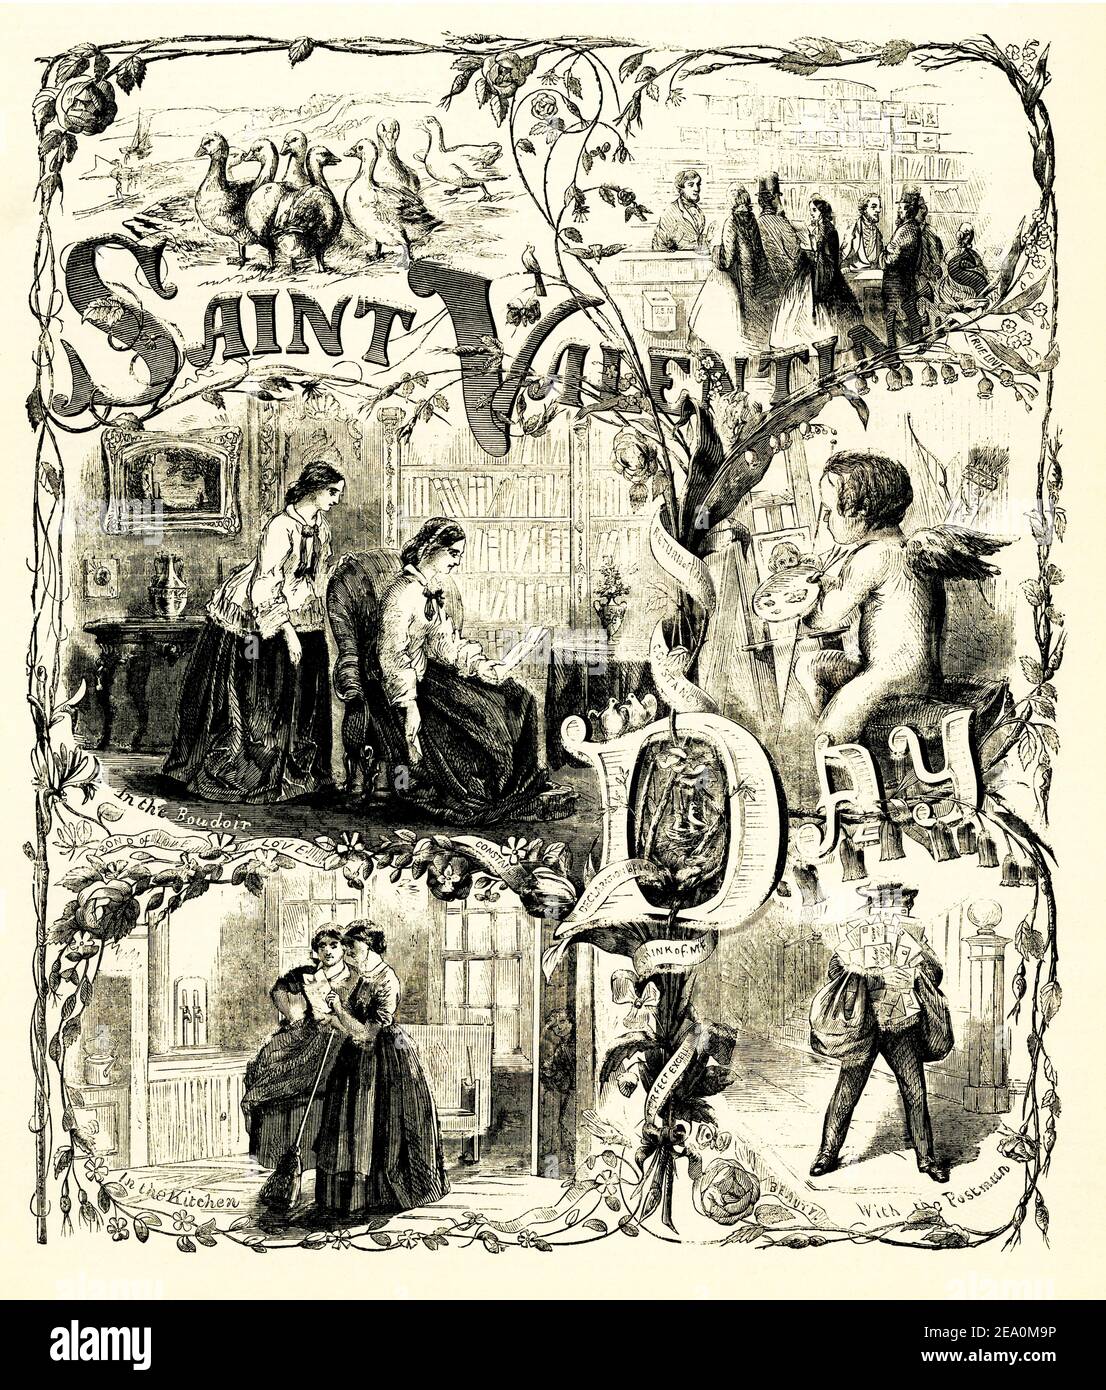 This illustrations is titled: Saint Valentine's Day. It is taken from Harper's Weekly Vol V  No 216 New York Saturday February 16 1861 Stock Photo